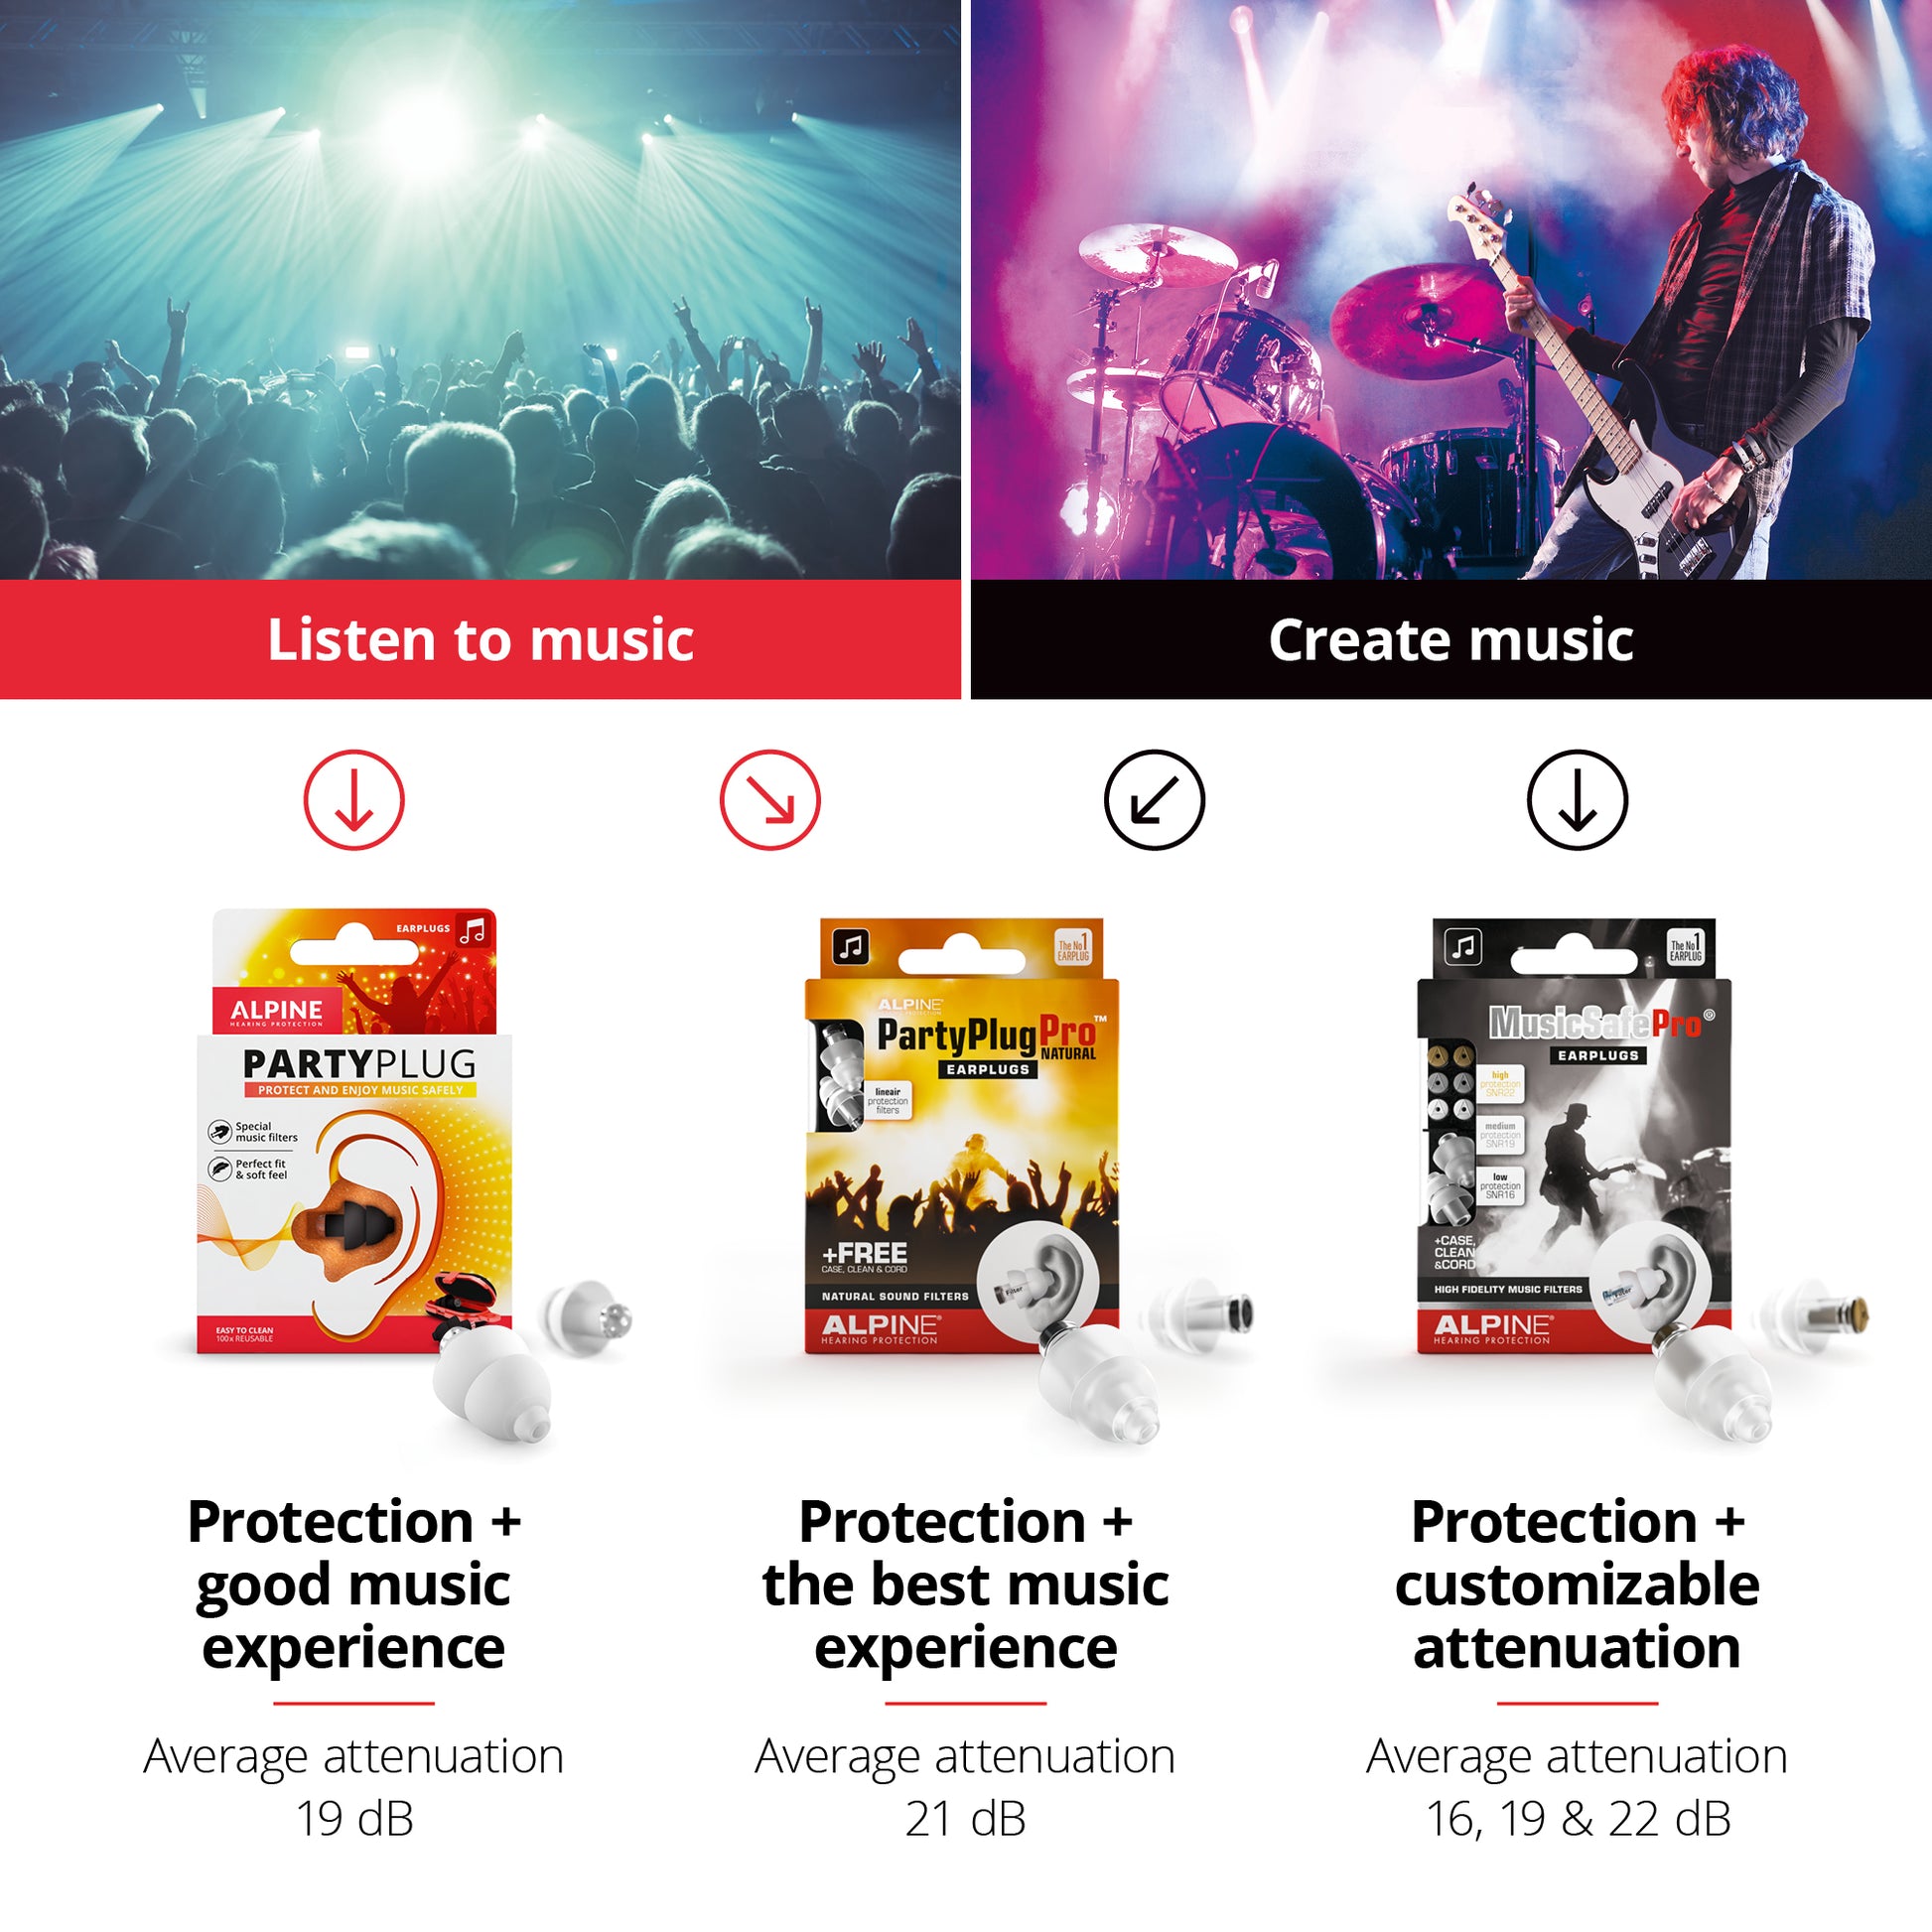 Alpine PartyPlugs to protect your ears during music Alpine hearing protection Earplugs earmuffs protect your ear red dot award party concert festival partyplug MusicSafe MusicSafe Earmuff MusicSafe Pro comparison listen to music create music